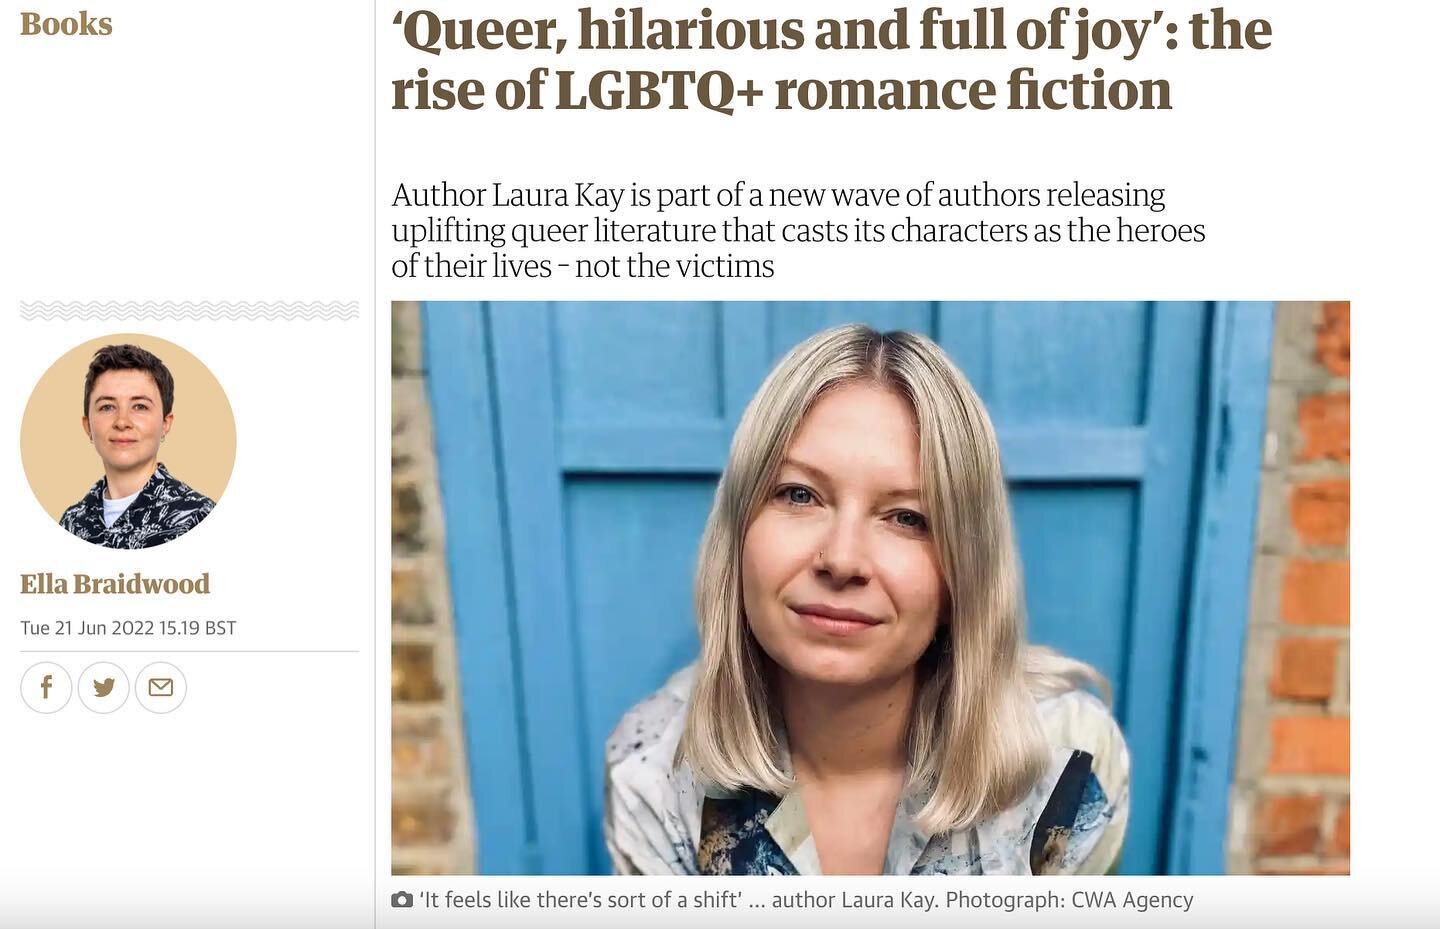 Smizing my way onto the front page of Guardian Books. Thank you @ellabraidwood for this wonderful piece highlighting loads of great queer romcom and romance writers. We are&hellip;good!!?!